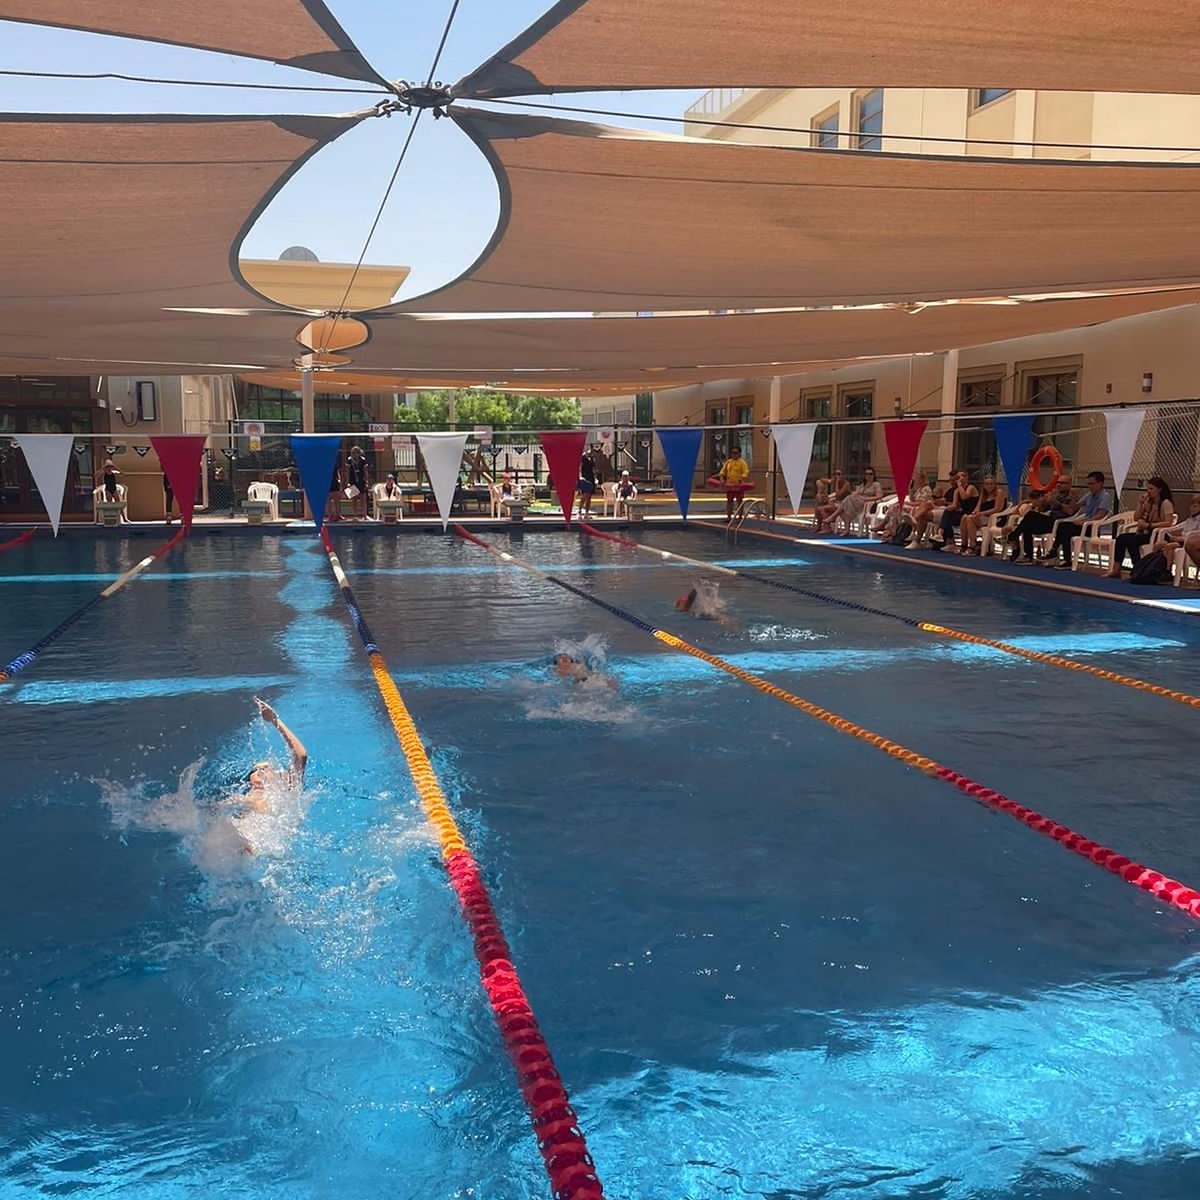 Last week our Swim Squad took part in a @CognitaSchools Dubai friendly Swim Gala.
Hosted by @RPSDubai the gala also included pupils from @HorizonDubaiUAE & @HISDubai 
A thoroughly enjoyable afternoon, with some great swimming, healthy competition and plenty of fun! #CognitaWay